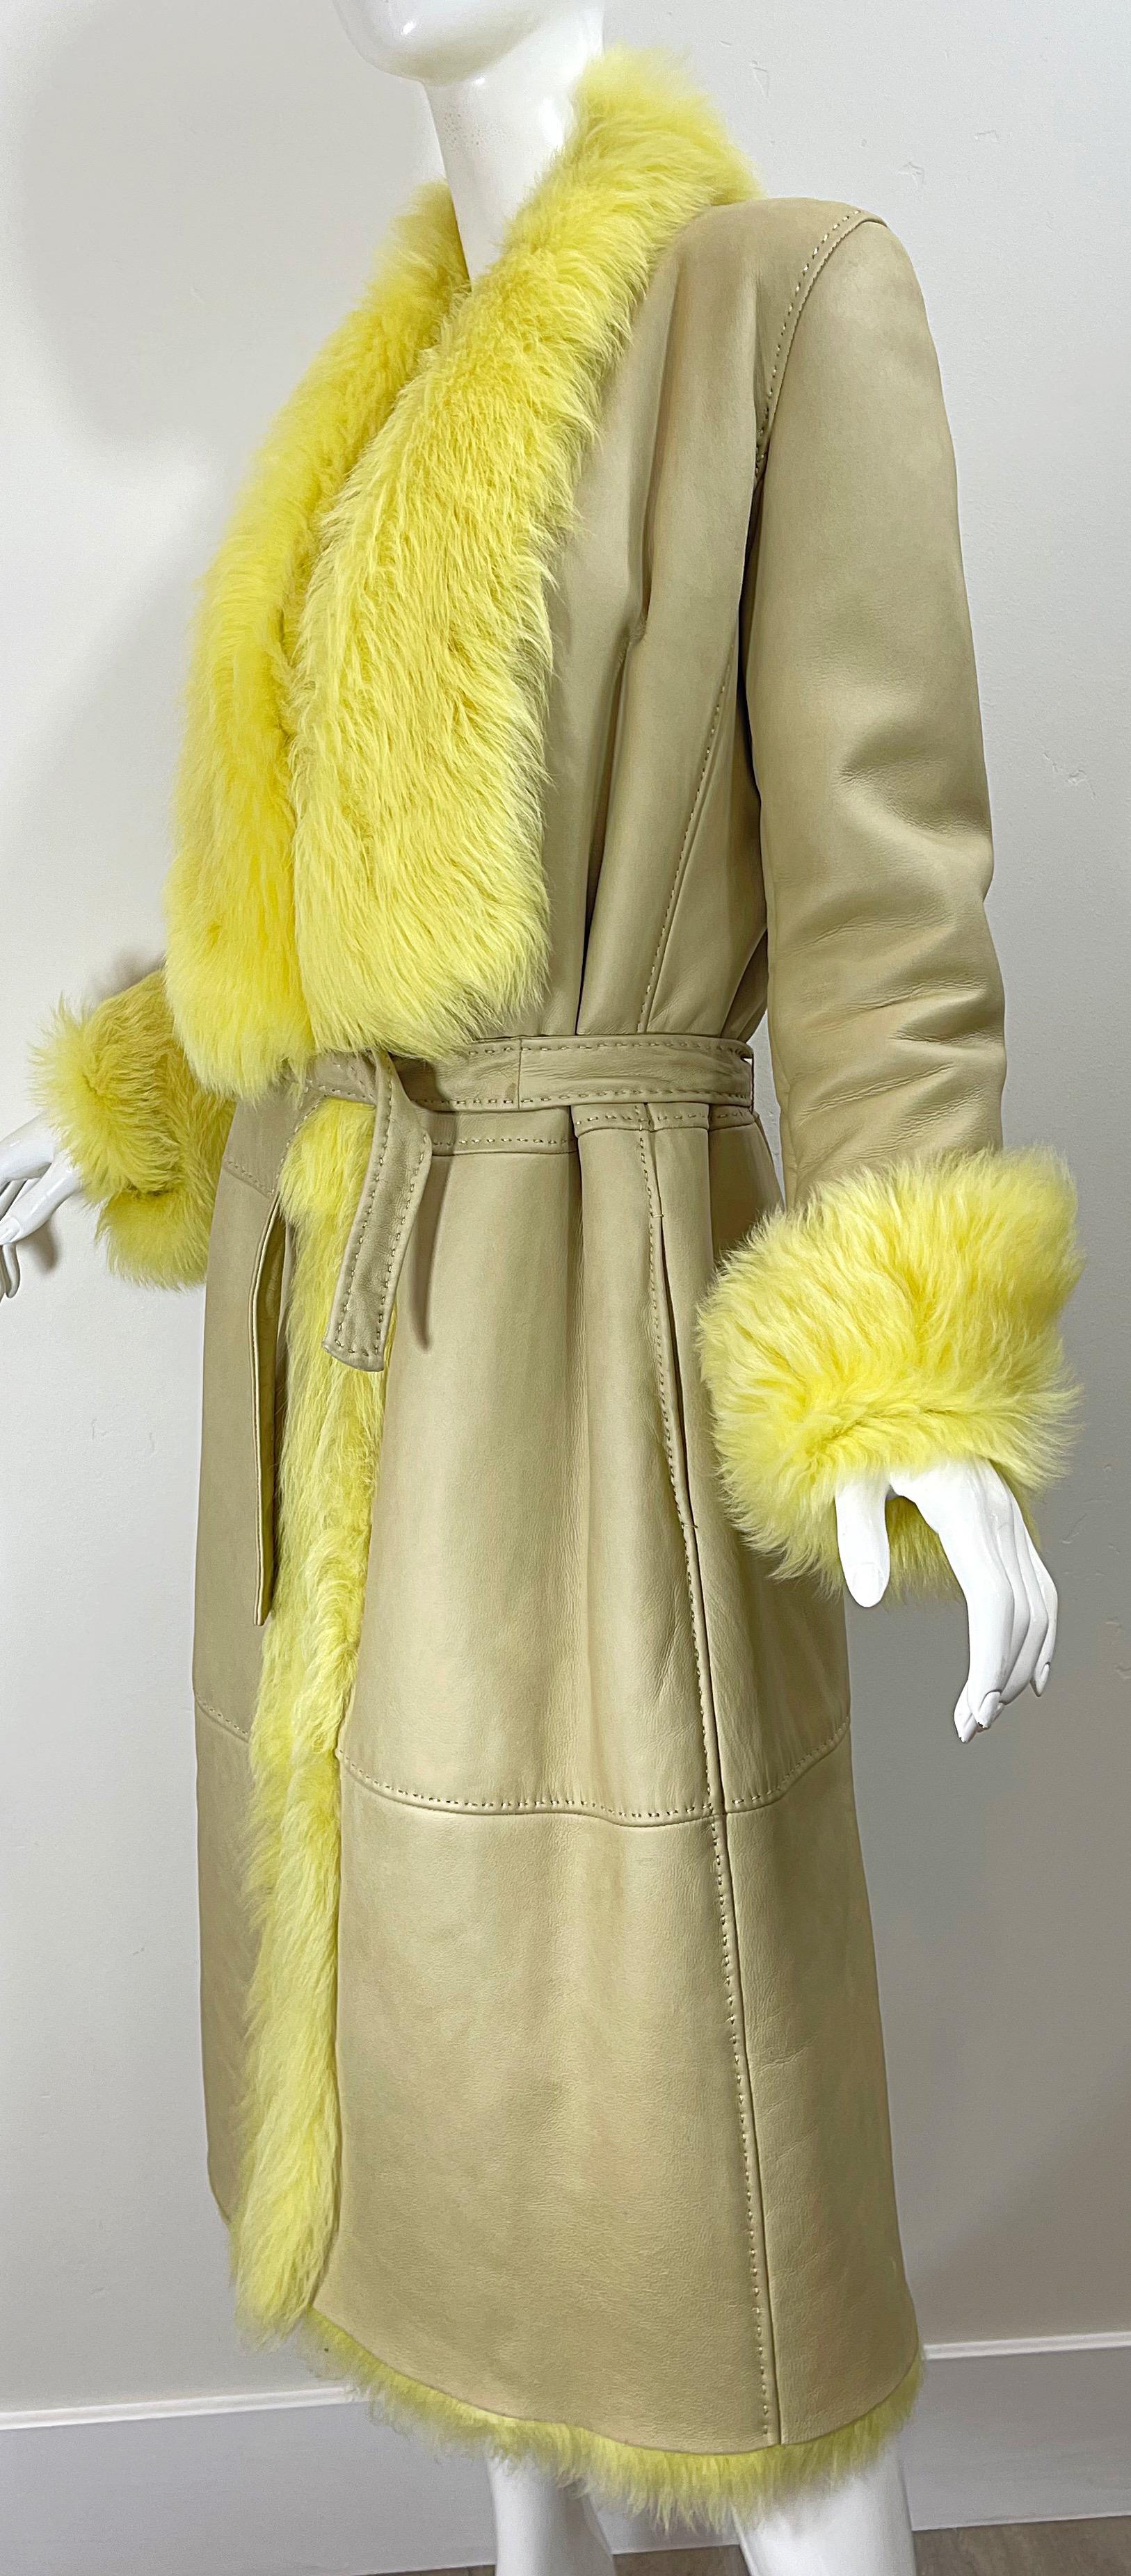 1990s Gianni Versace Tan Leather Yellow Shearling Fur Vintage Trench Coat Jacket For Sale 2